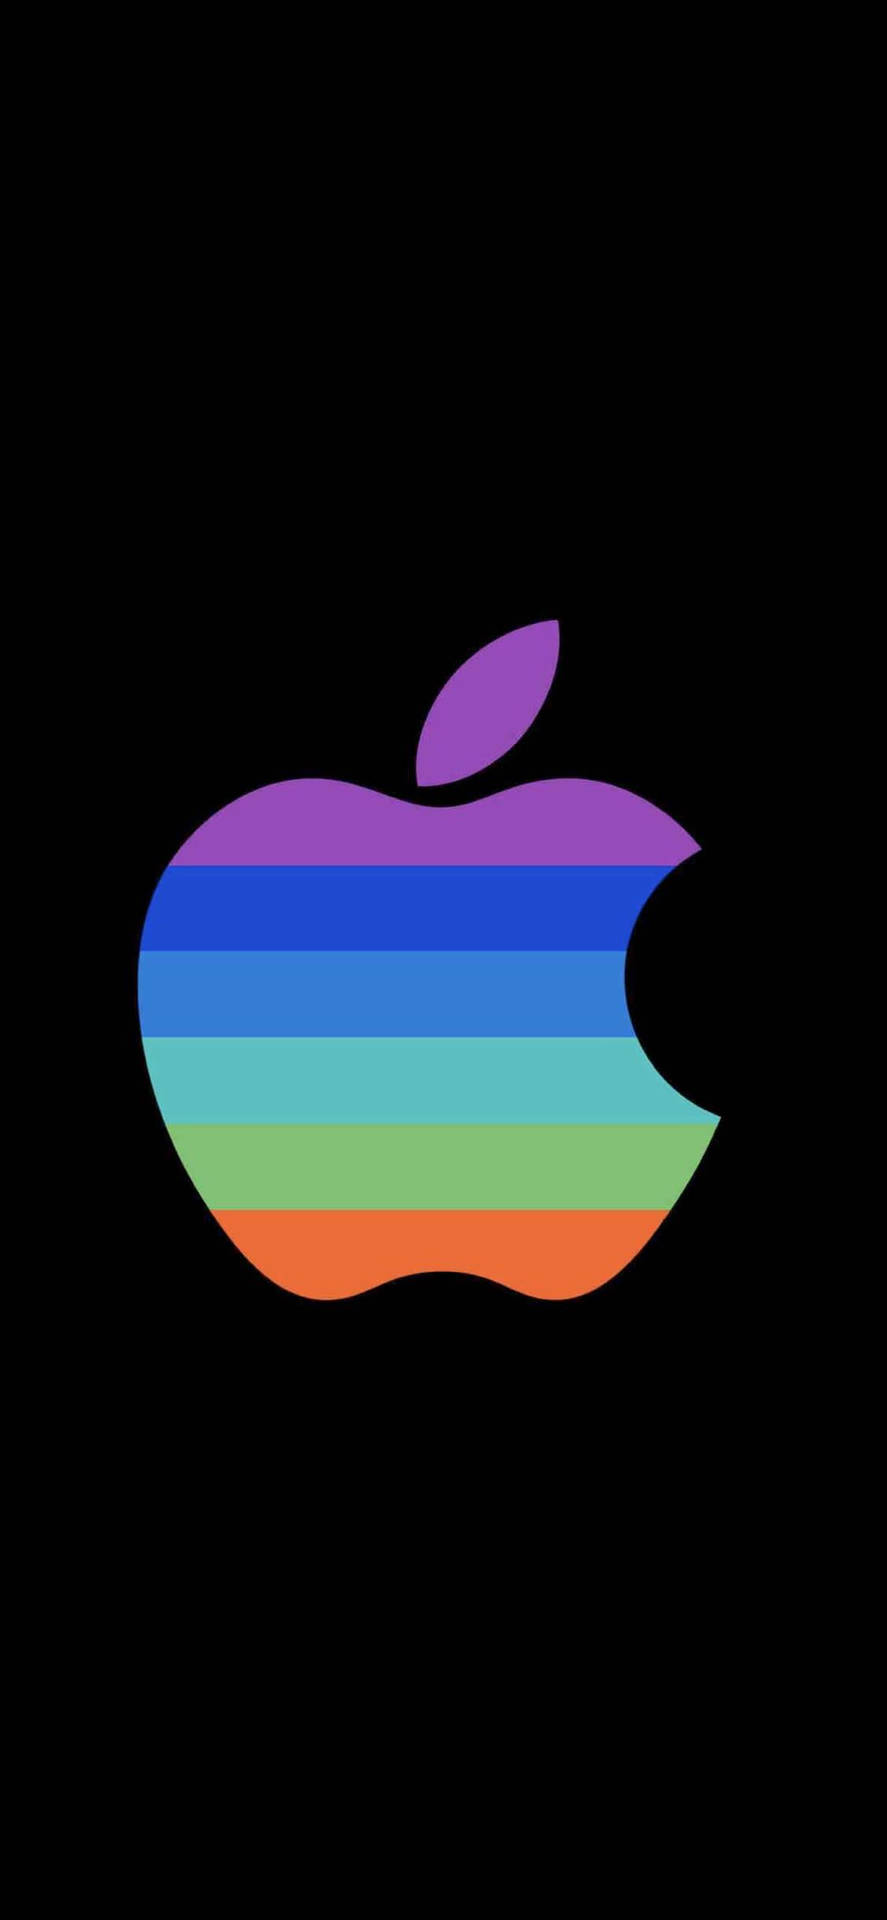 Bright Colorful Apple Logo Iphone